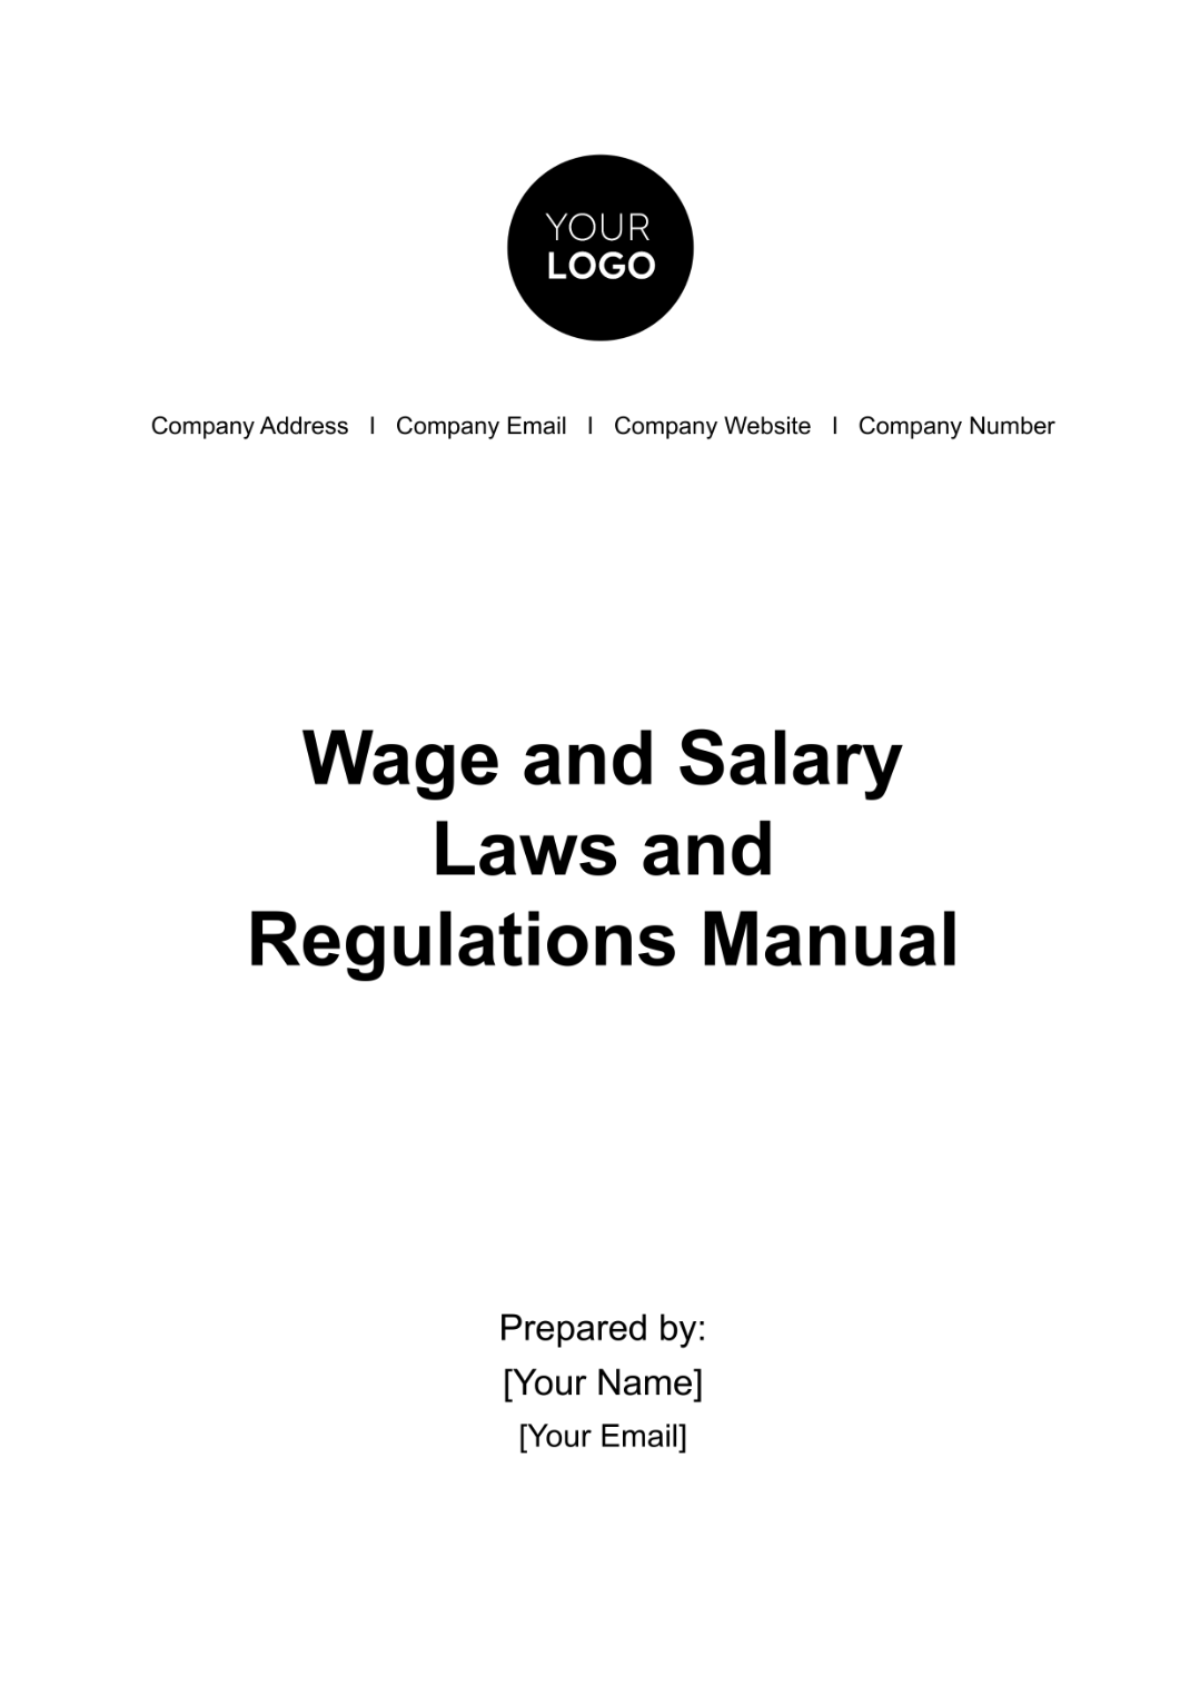 Free Wage and Salary Laws and Regulations Manual HR Template